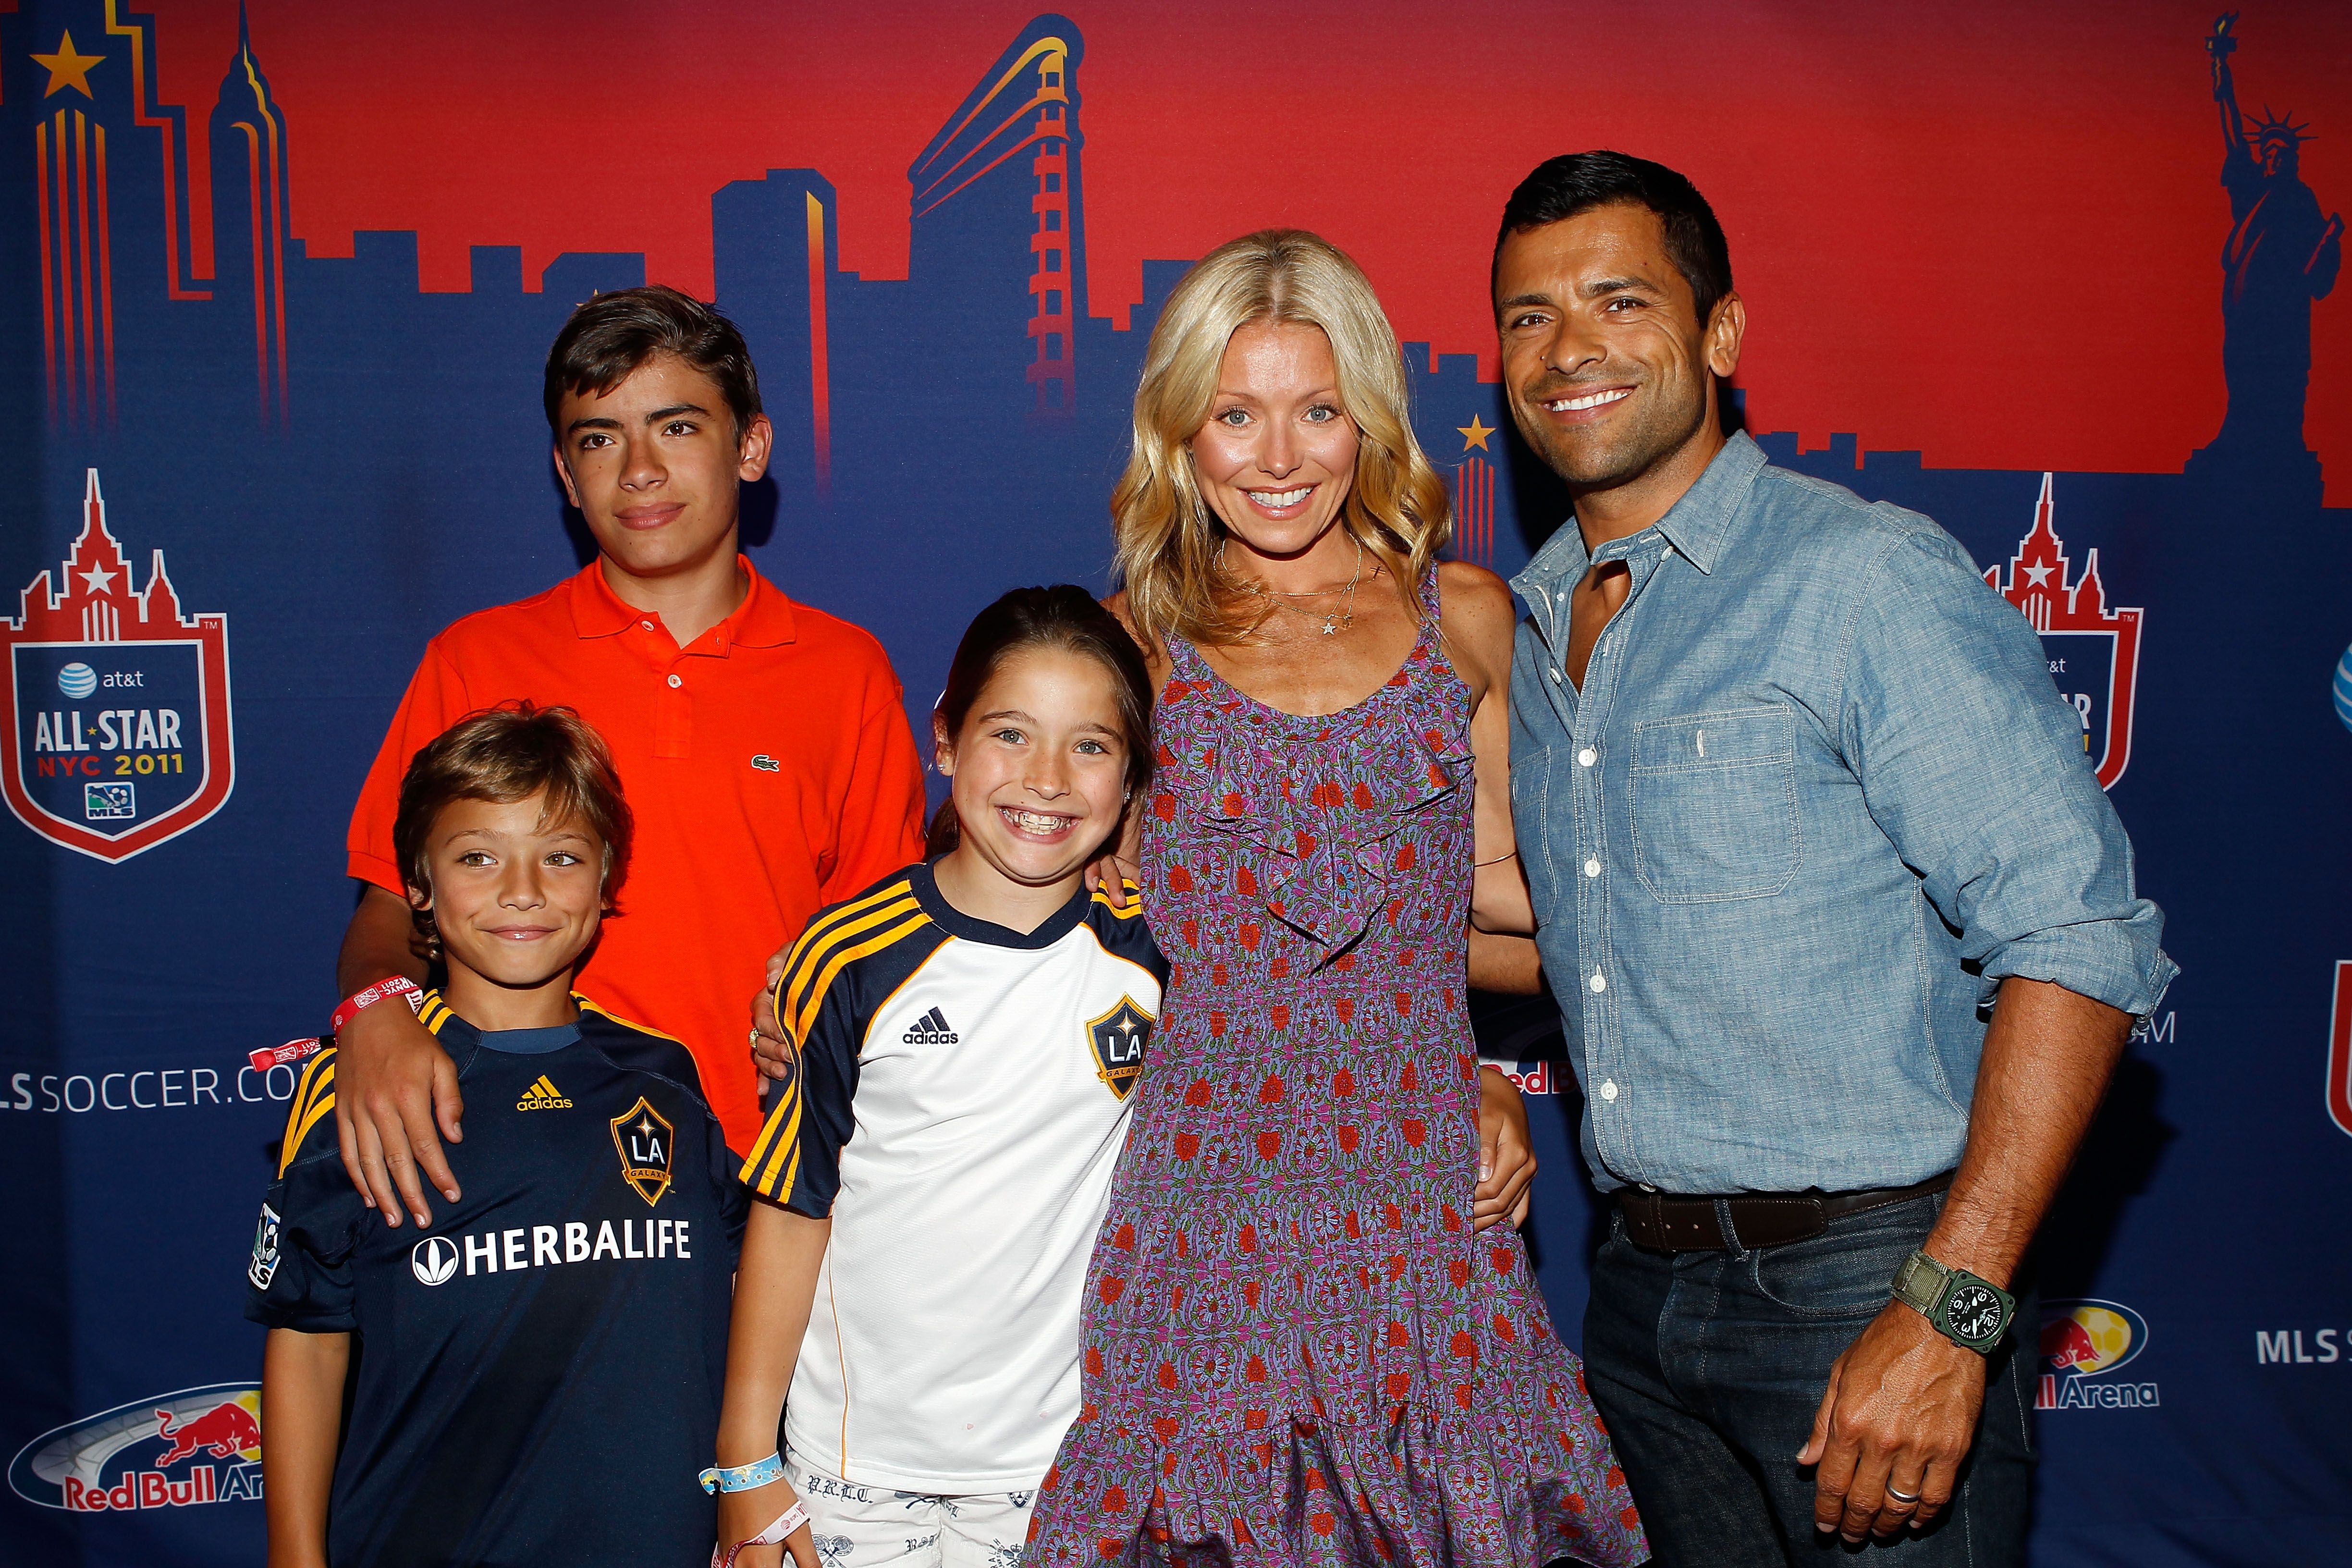 Kelly Ripa, Mark Consuelos and the kids at an MLS All-Star Game in 2011 in Harrison, New Jersey | Source: Getty Images